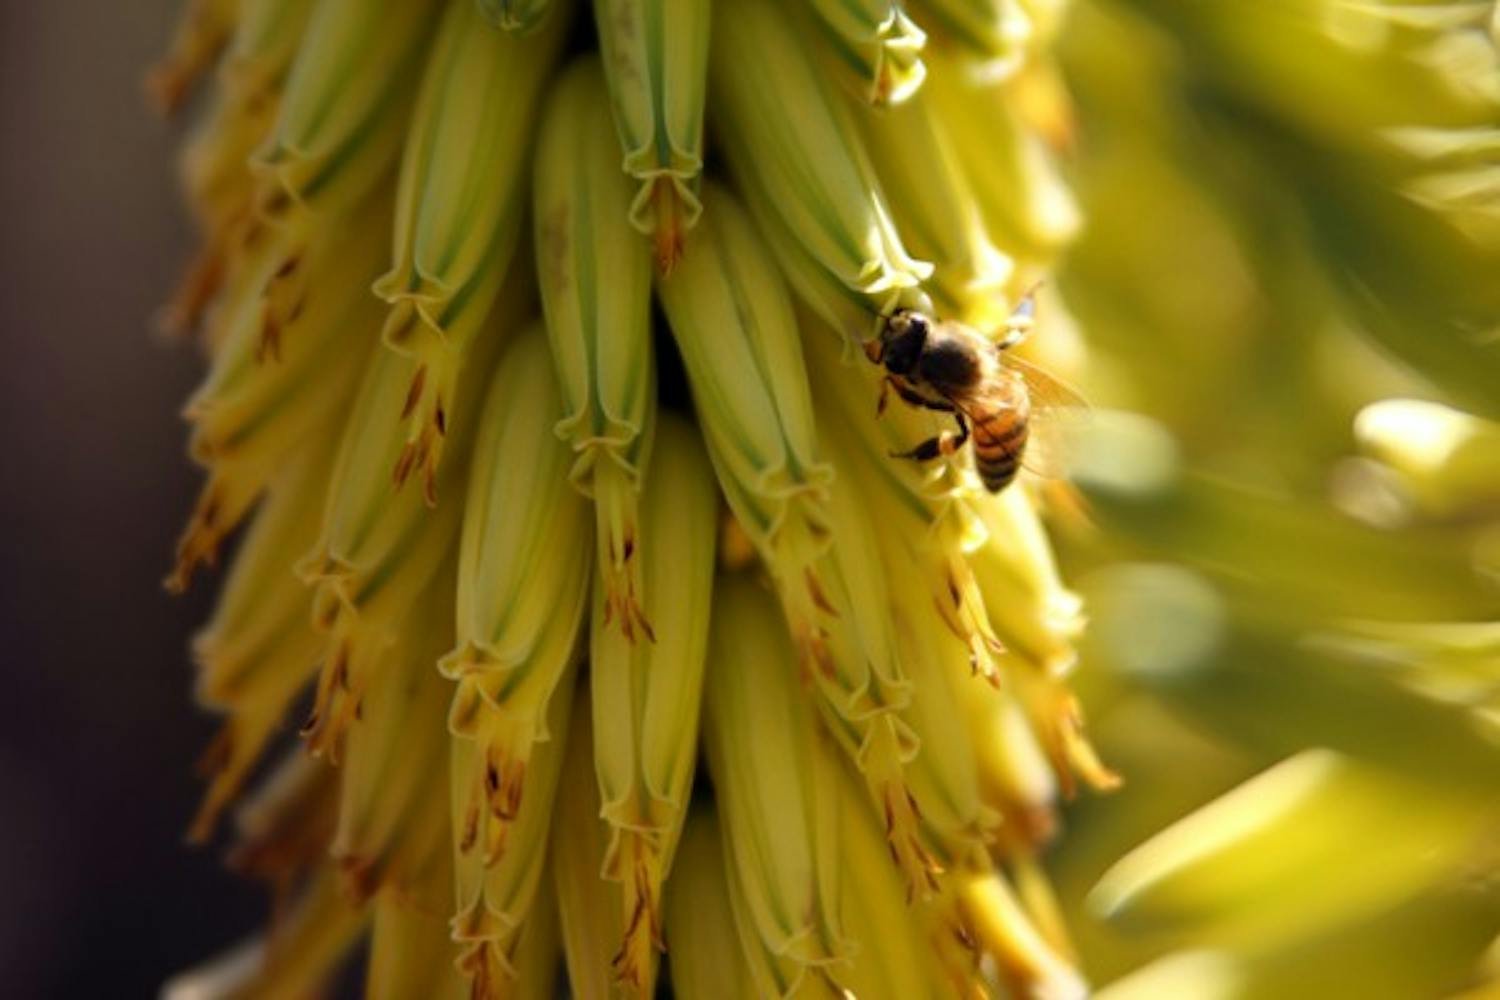 A bee pollinates a bright yellow flower near Palm Walk on the Tempe campus Sunday afternoon. (Photo by Jenn Allen)